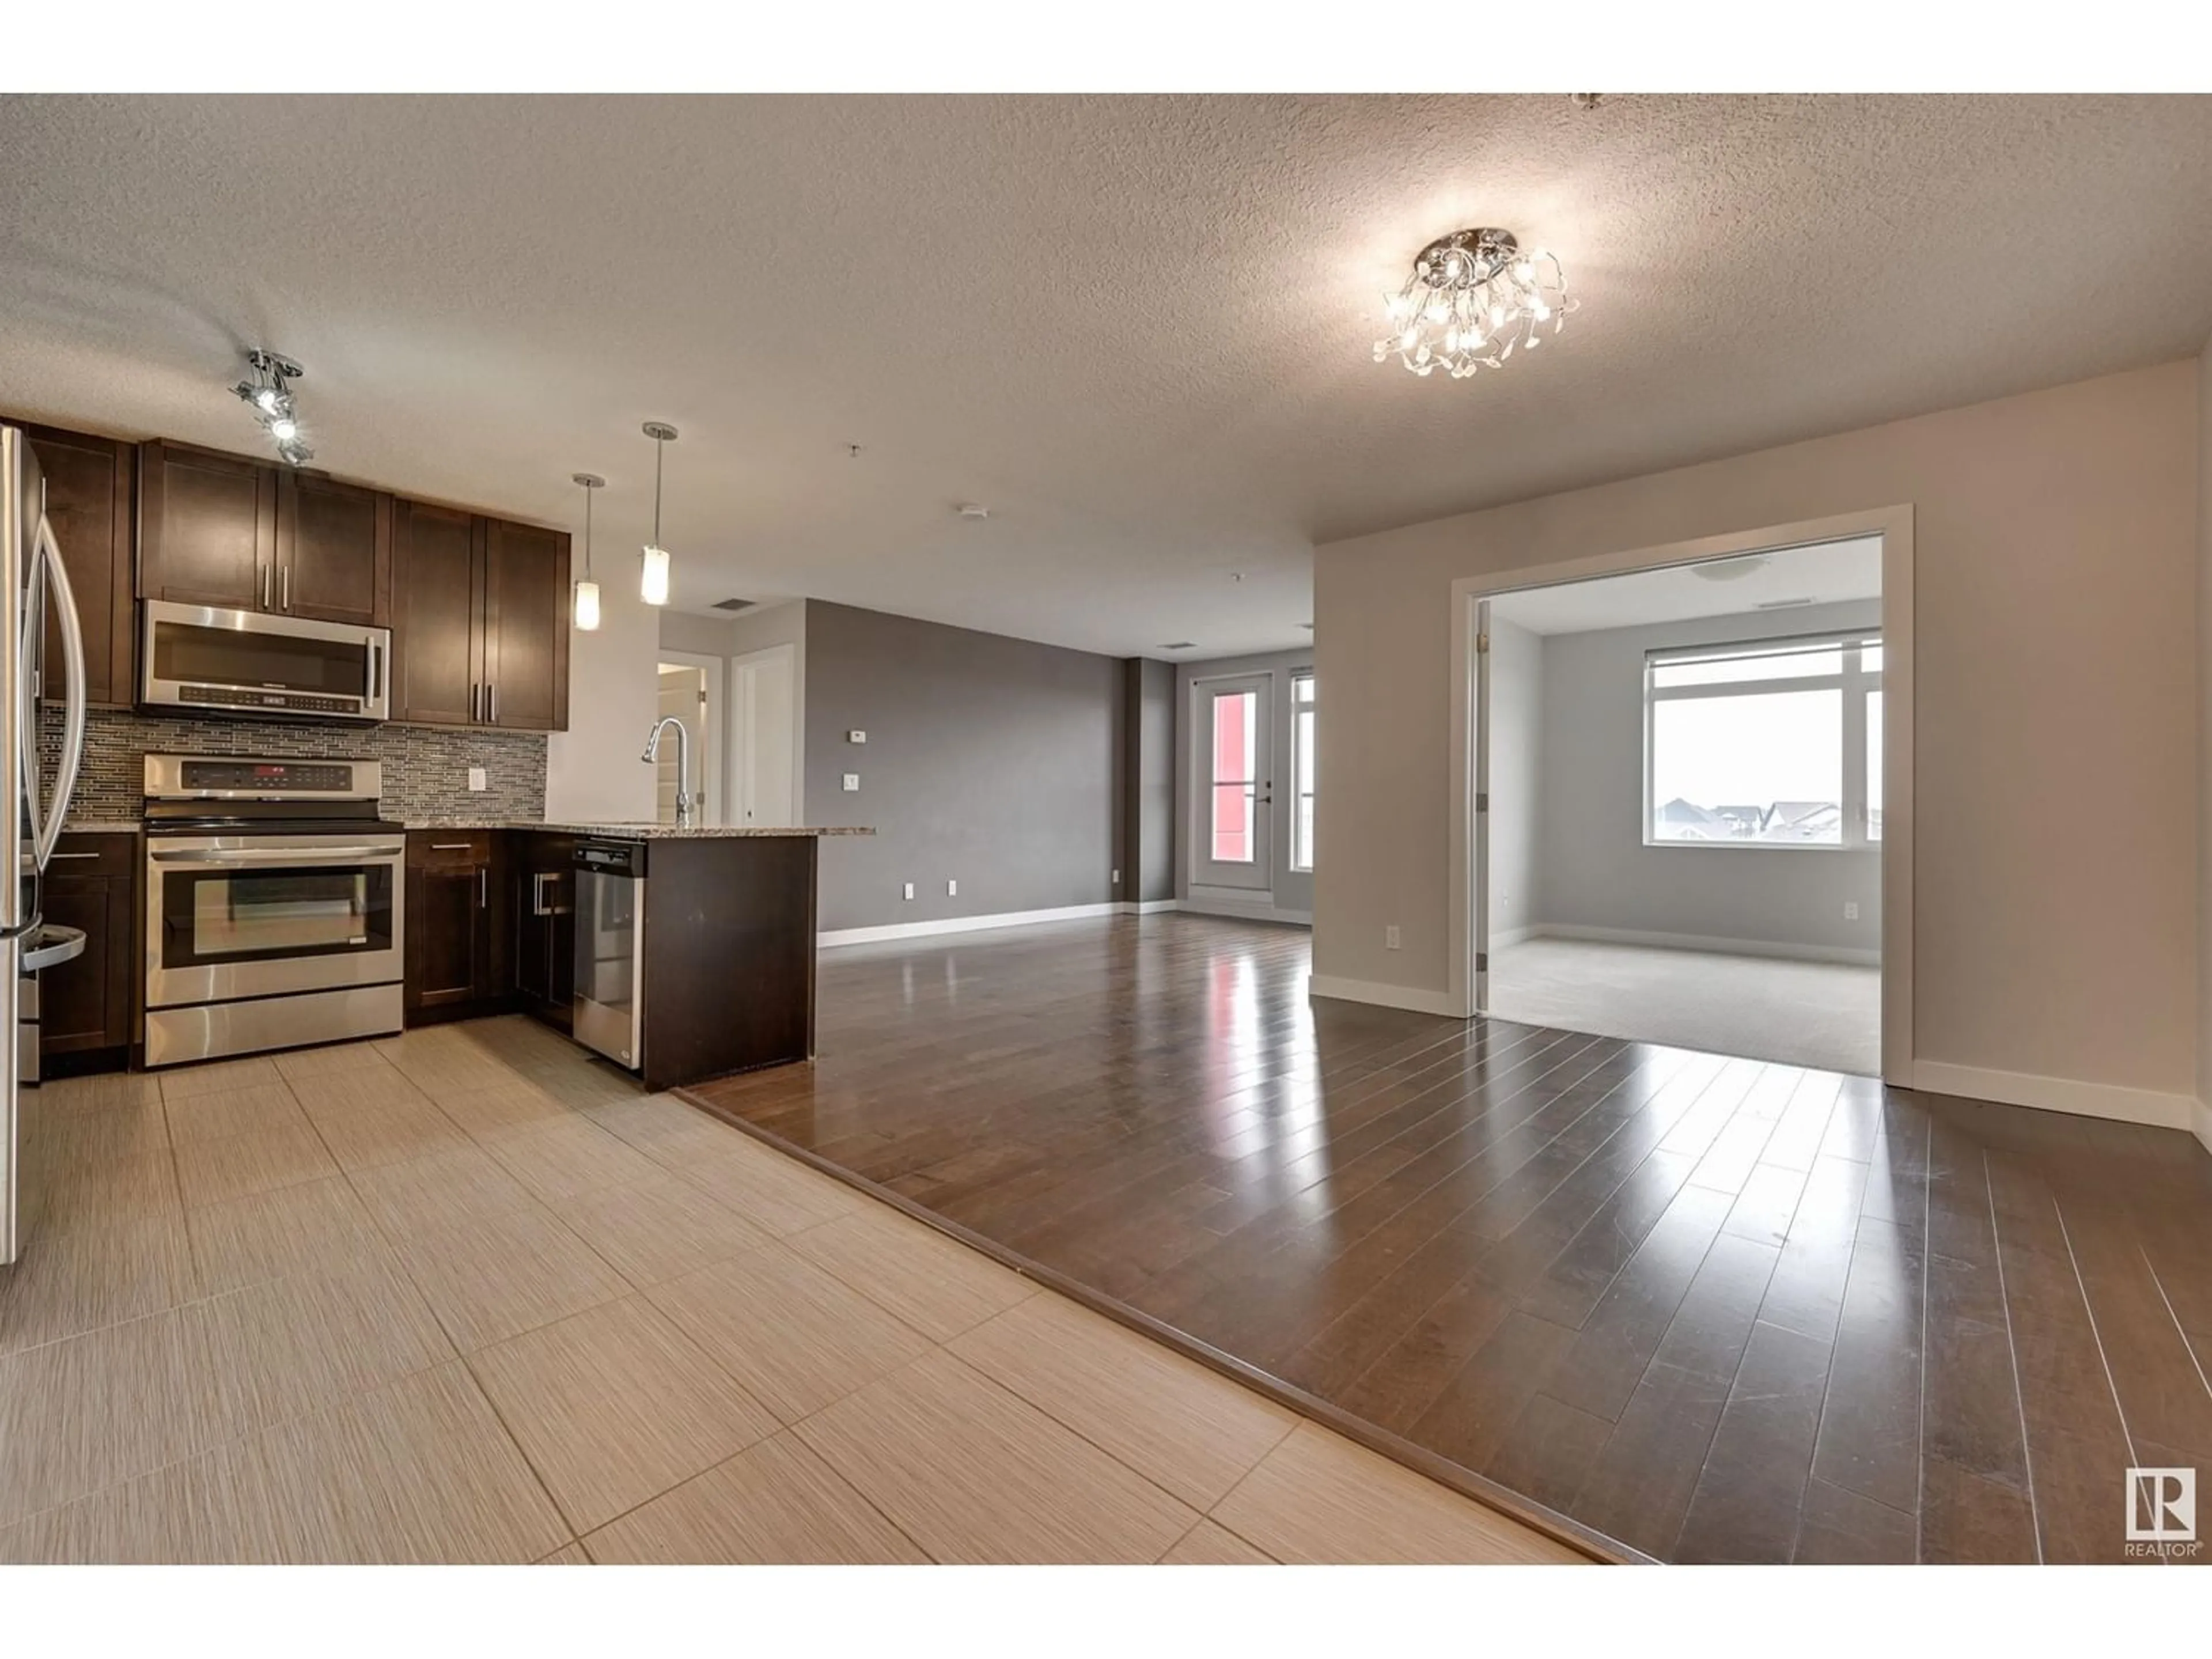 A pic of a room for #402 5151 WINDERMERE BV SW, Edmonton Alberta T6W2K4